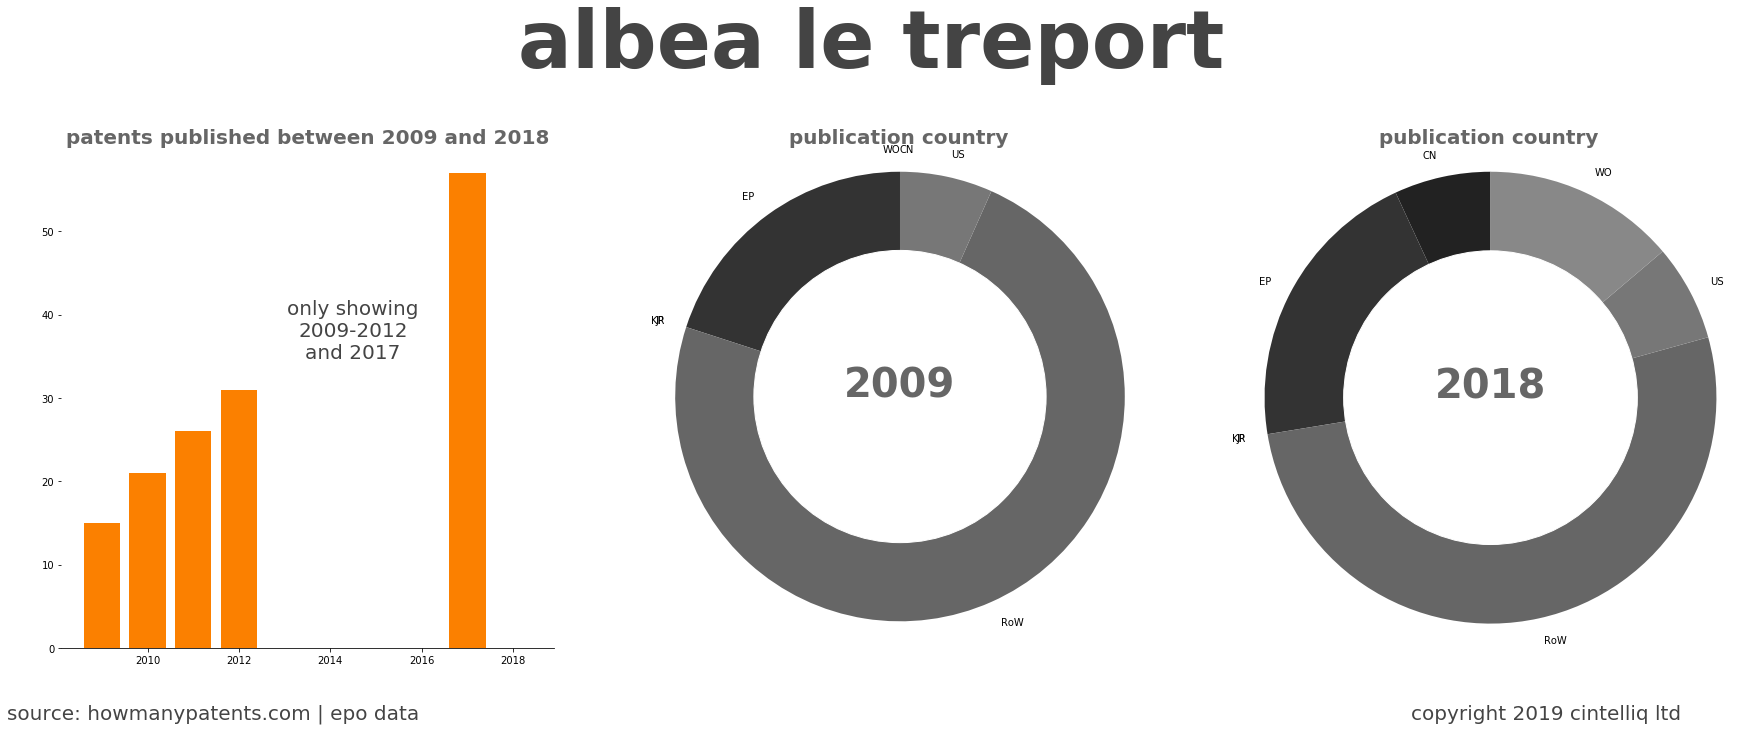 summary of patents for Albea Le Treport